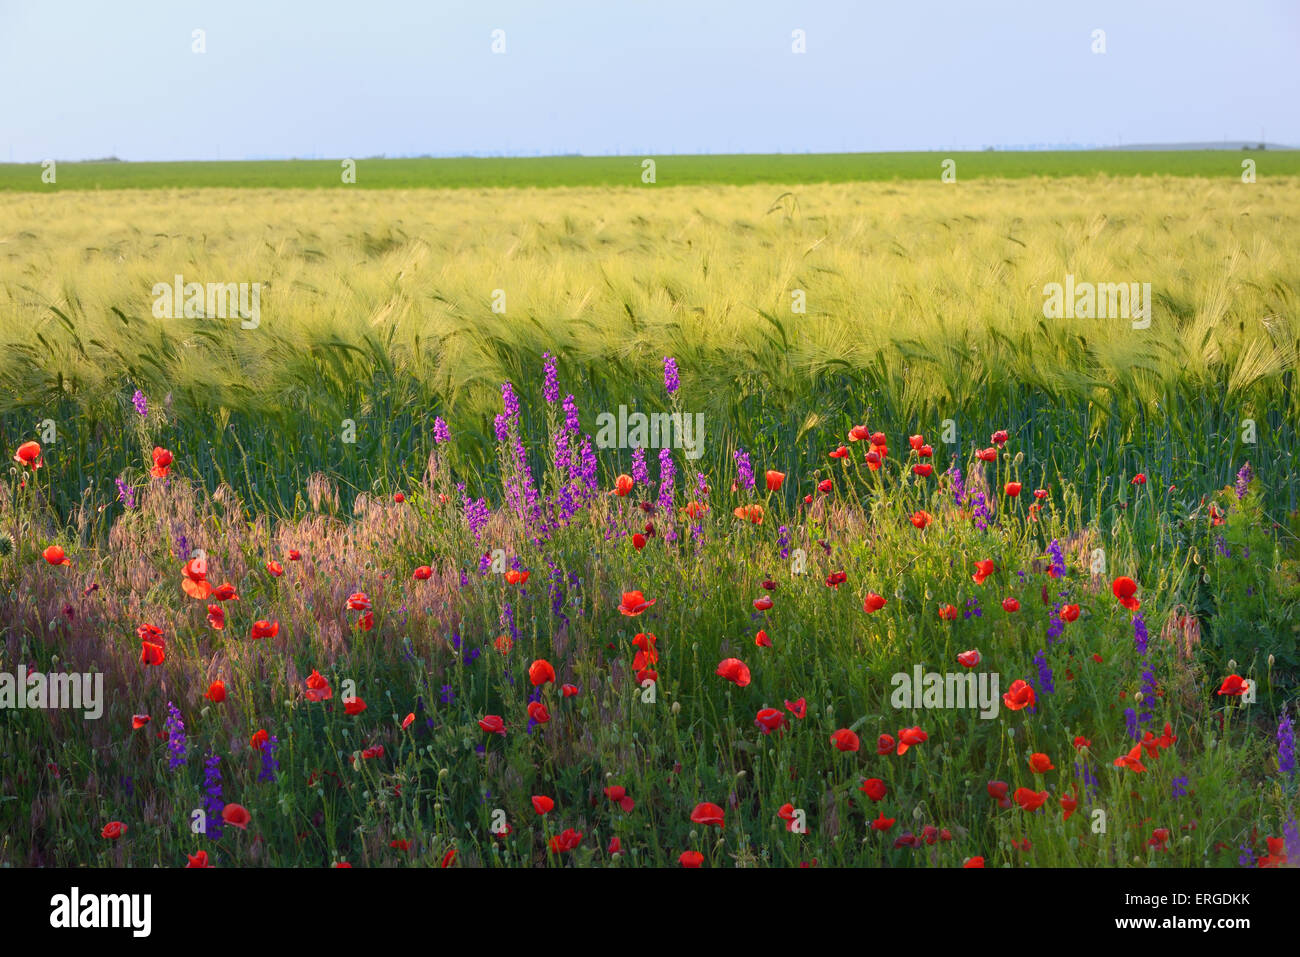 Field with grass, violet flowers and red poppies Stock Photo